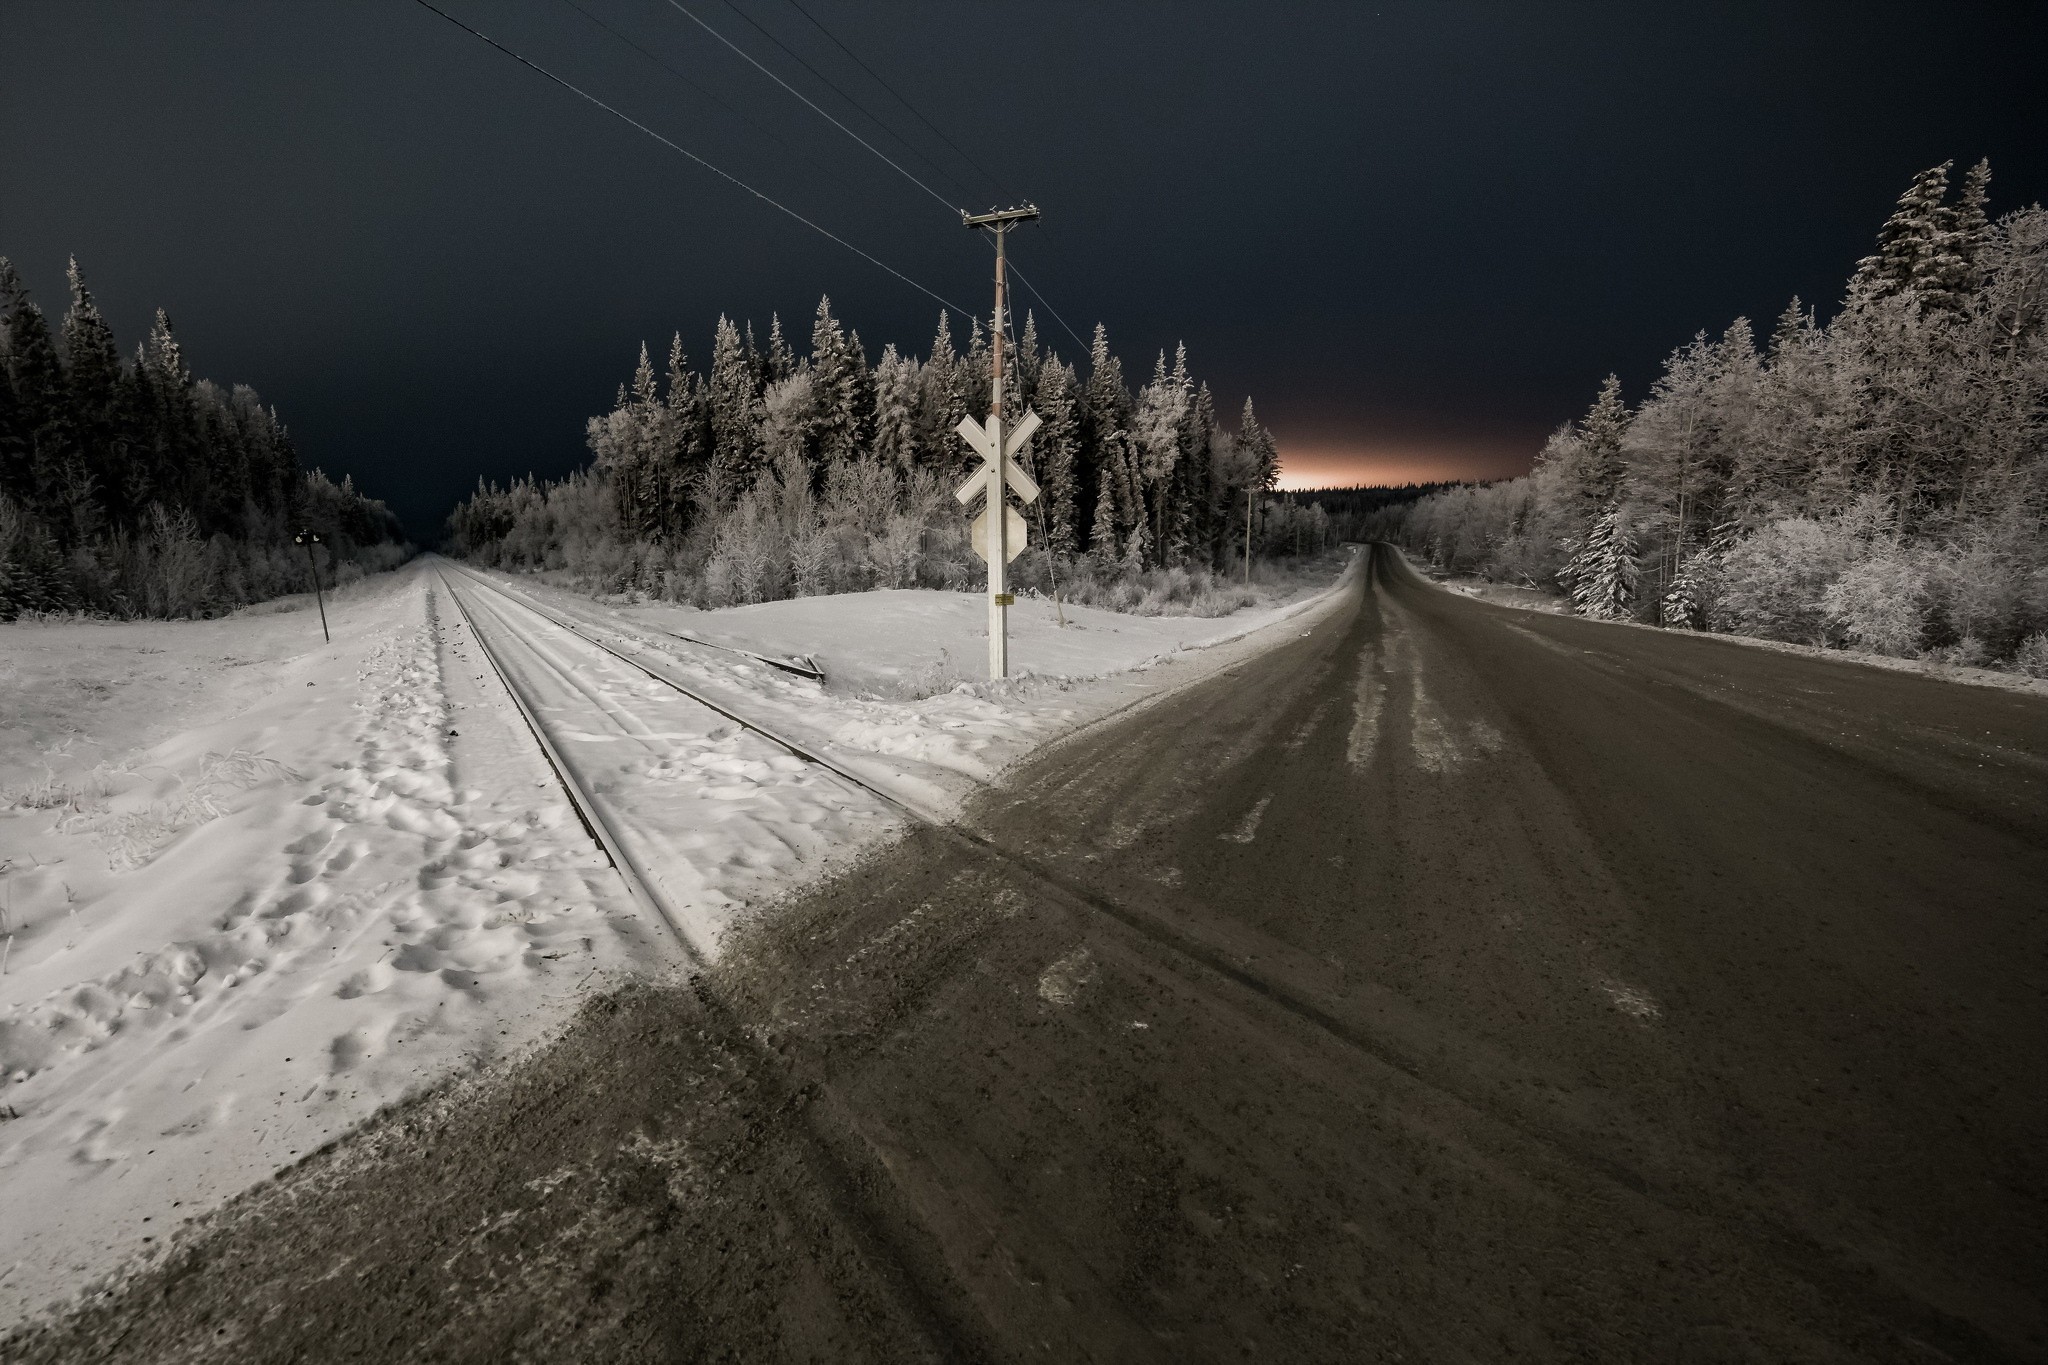 General 2048x1365 railway crossing night road snow trees cold railway outdoors